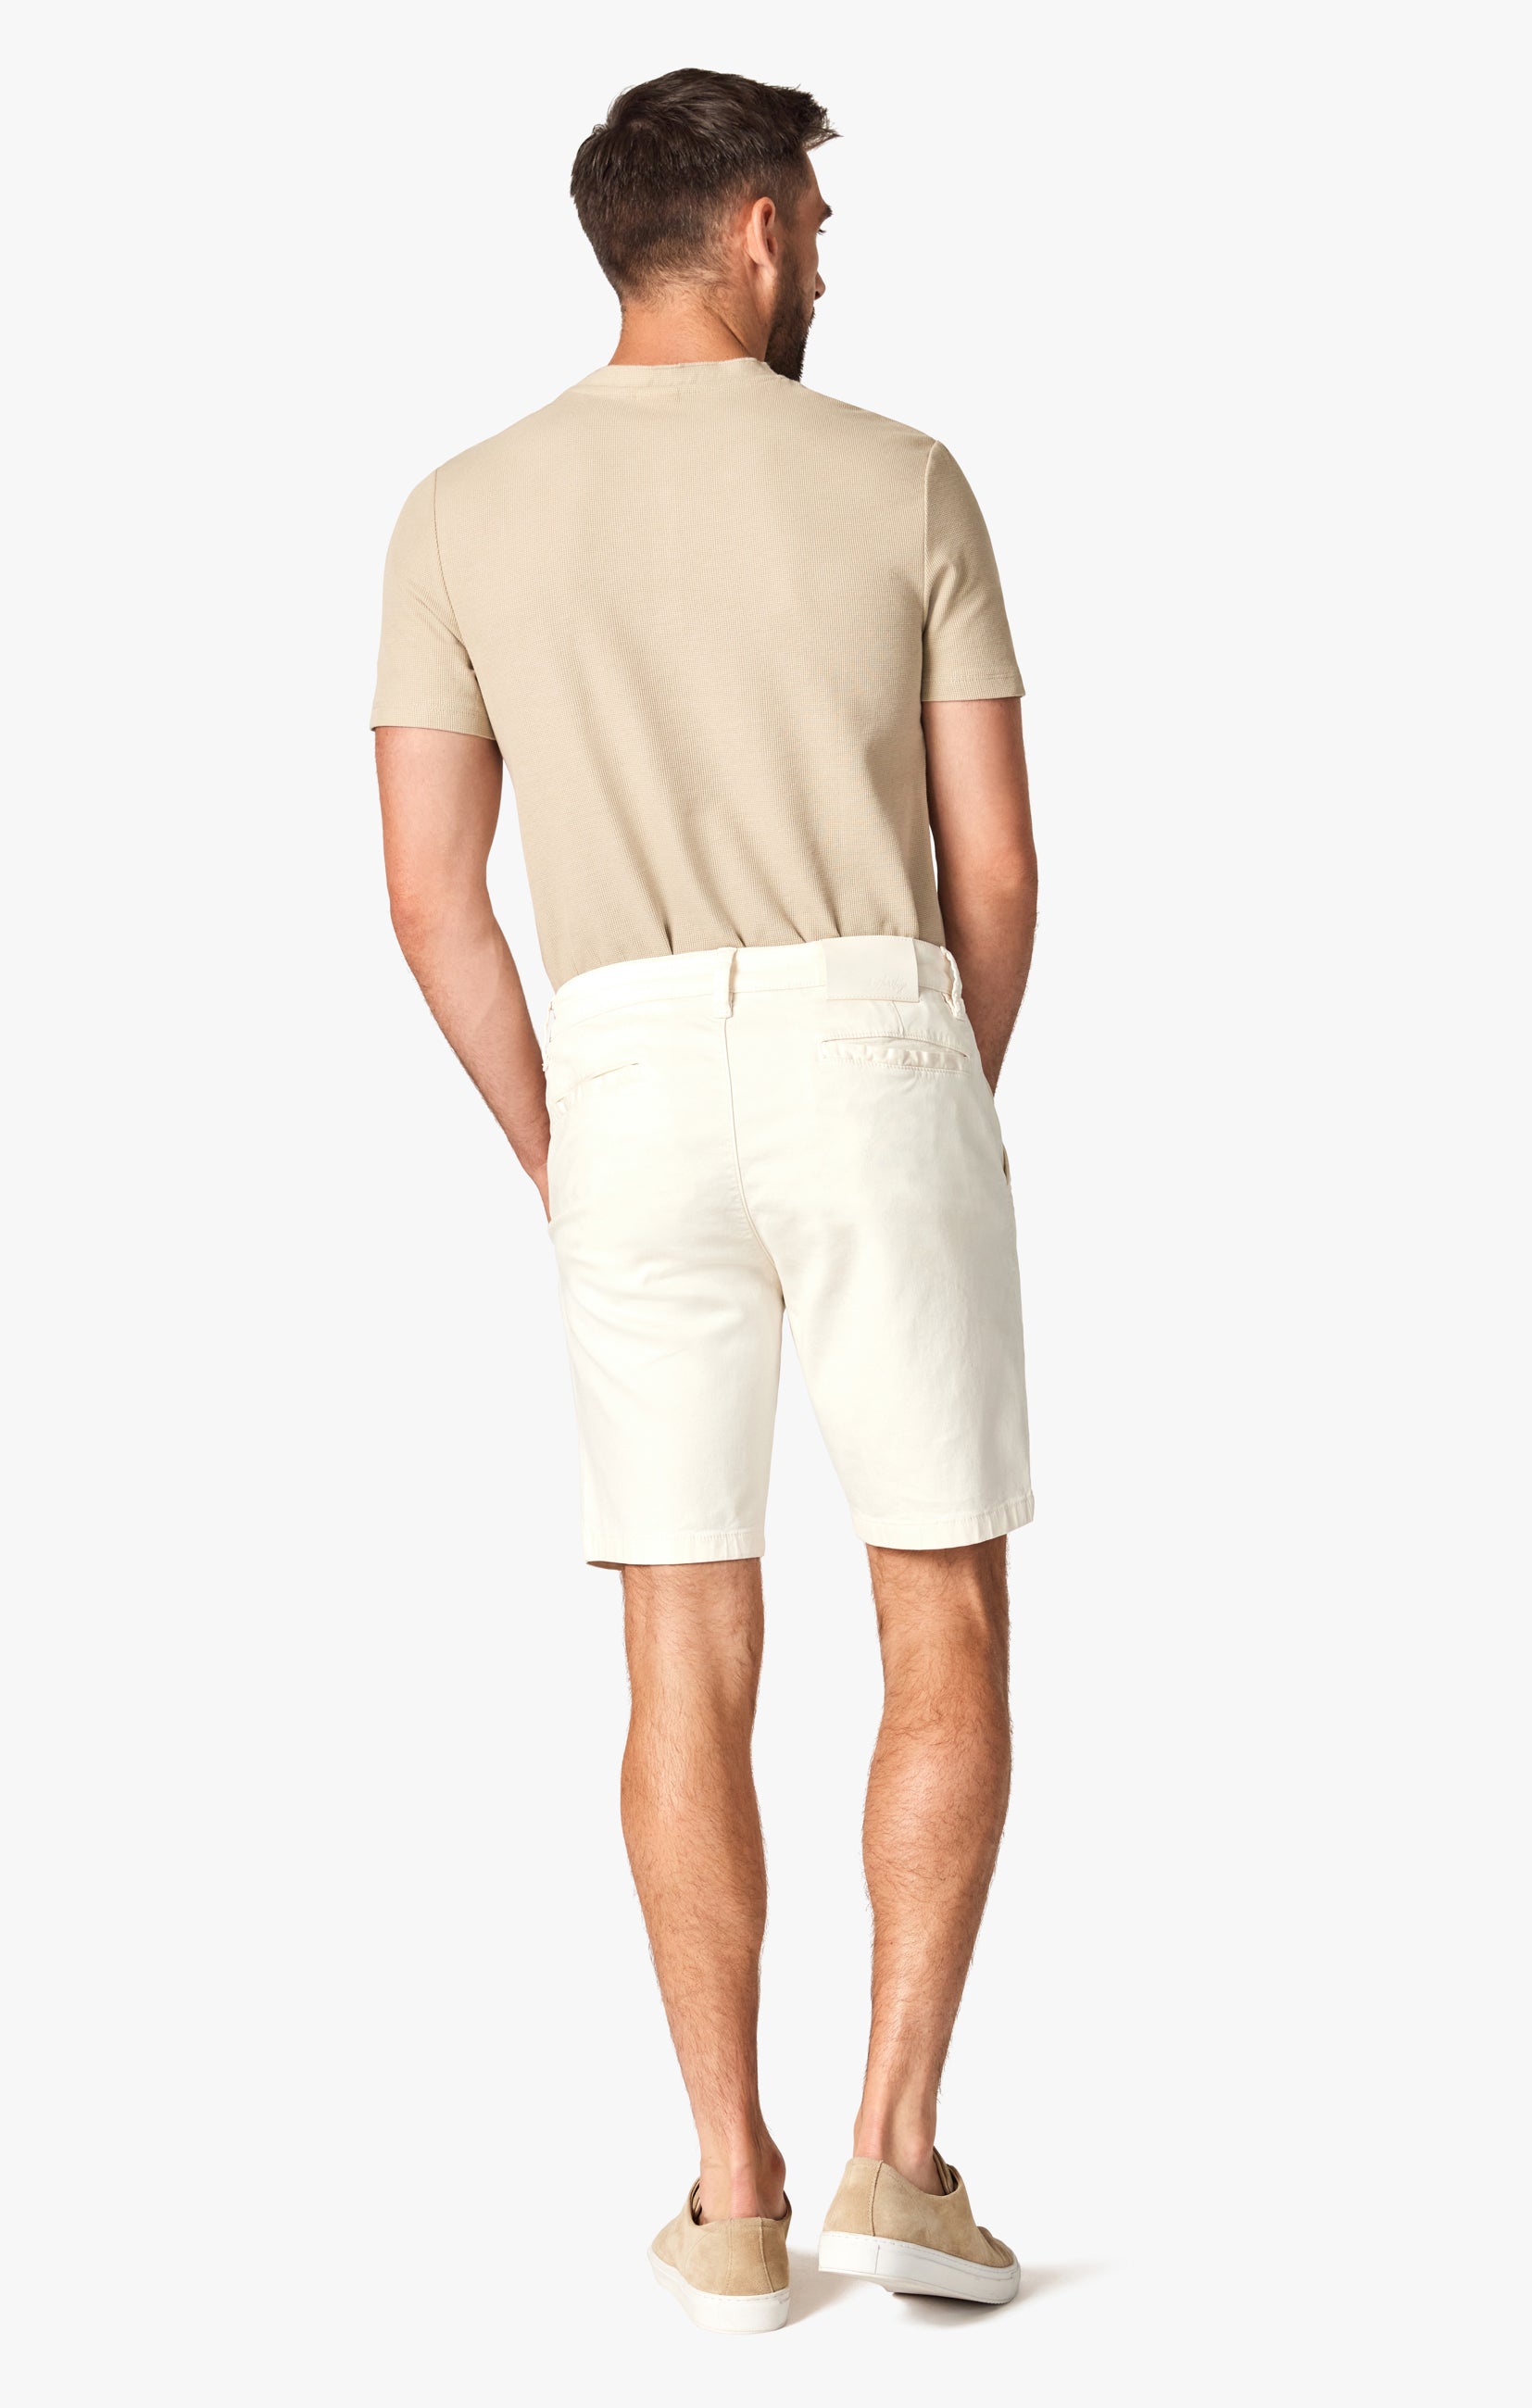 Arizona Shorts In Coconut Milk Soft Touch Image 5